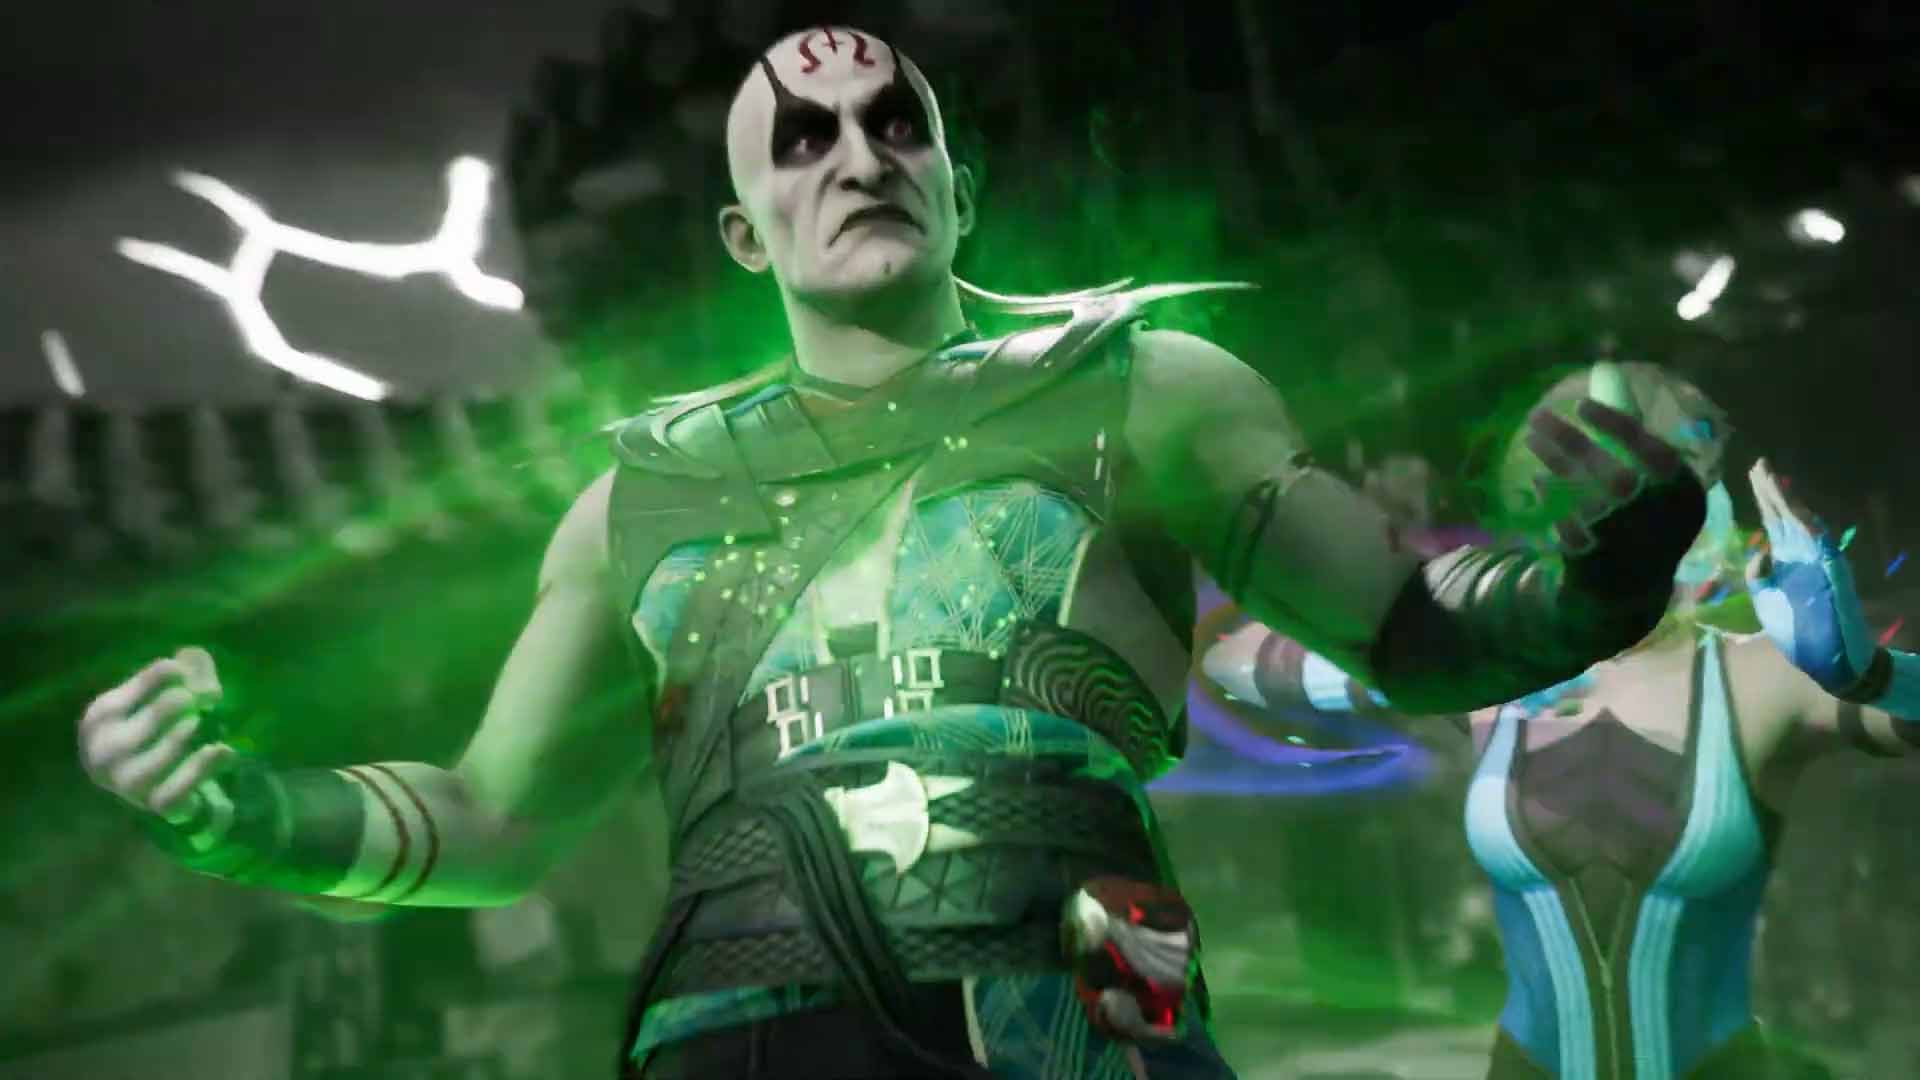 Mortal Kombat 1 trailer shows off Quan Chi, coming this month